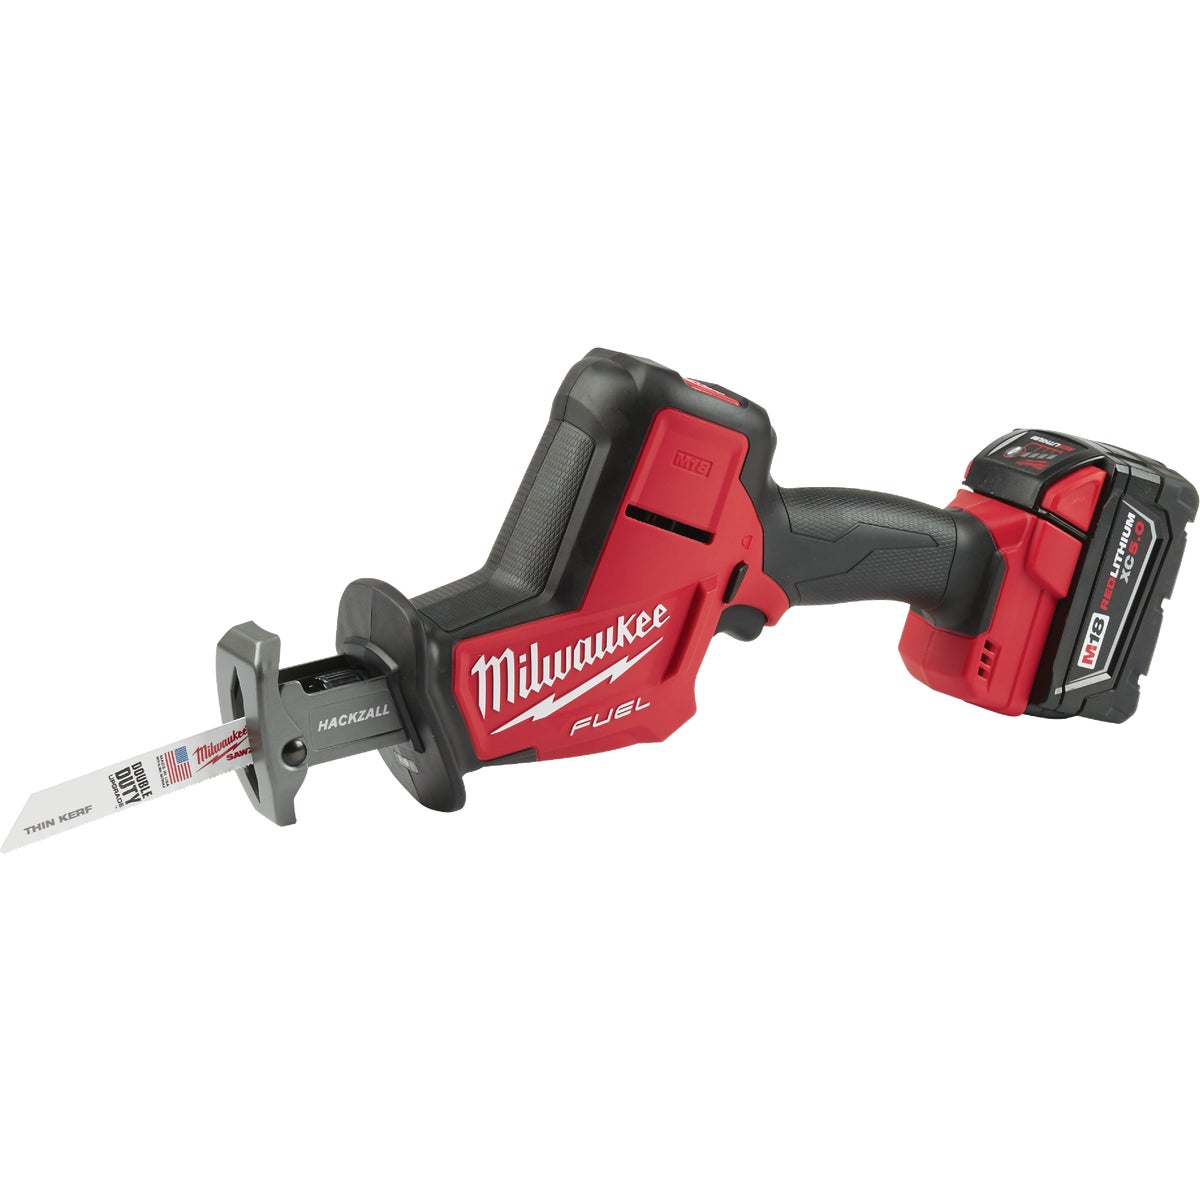 Milwaukee HACKZALL M18 FUEL 18-Volt Lithium-Ion Brushless Cordless Reciprocating Saw Kit